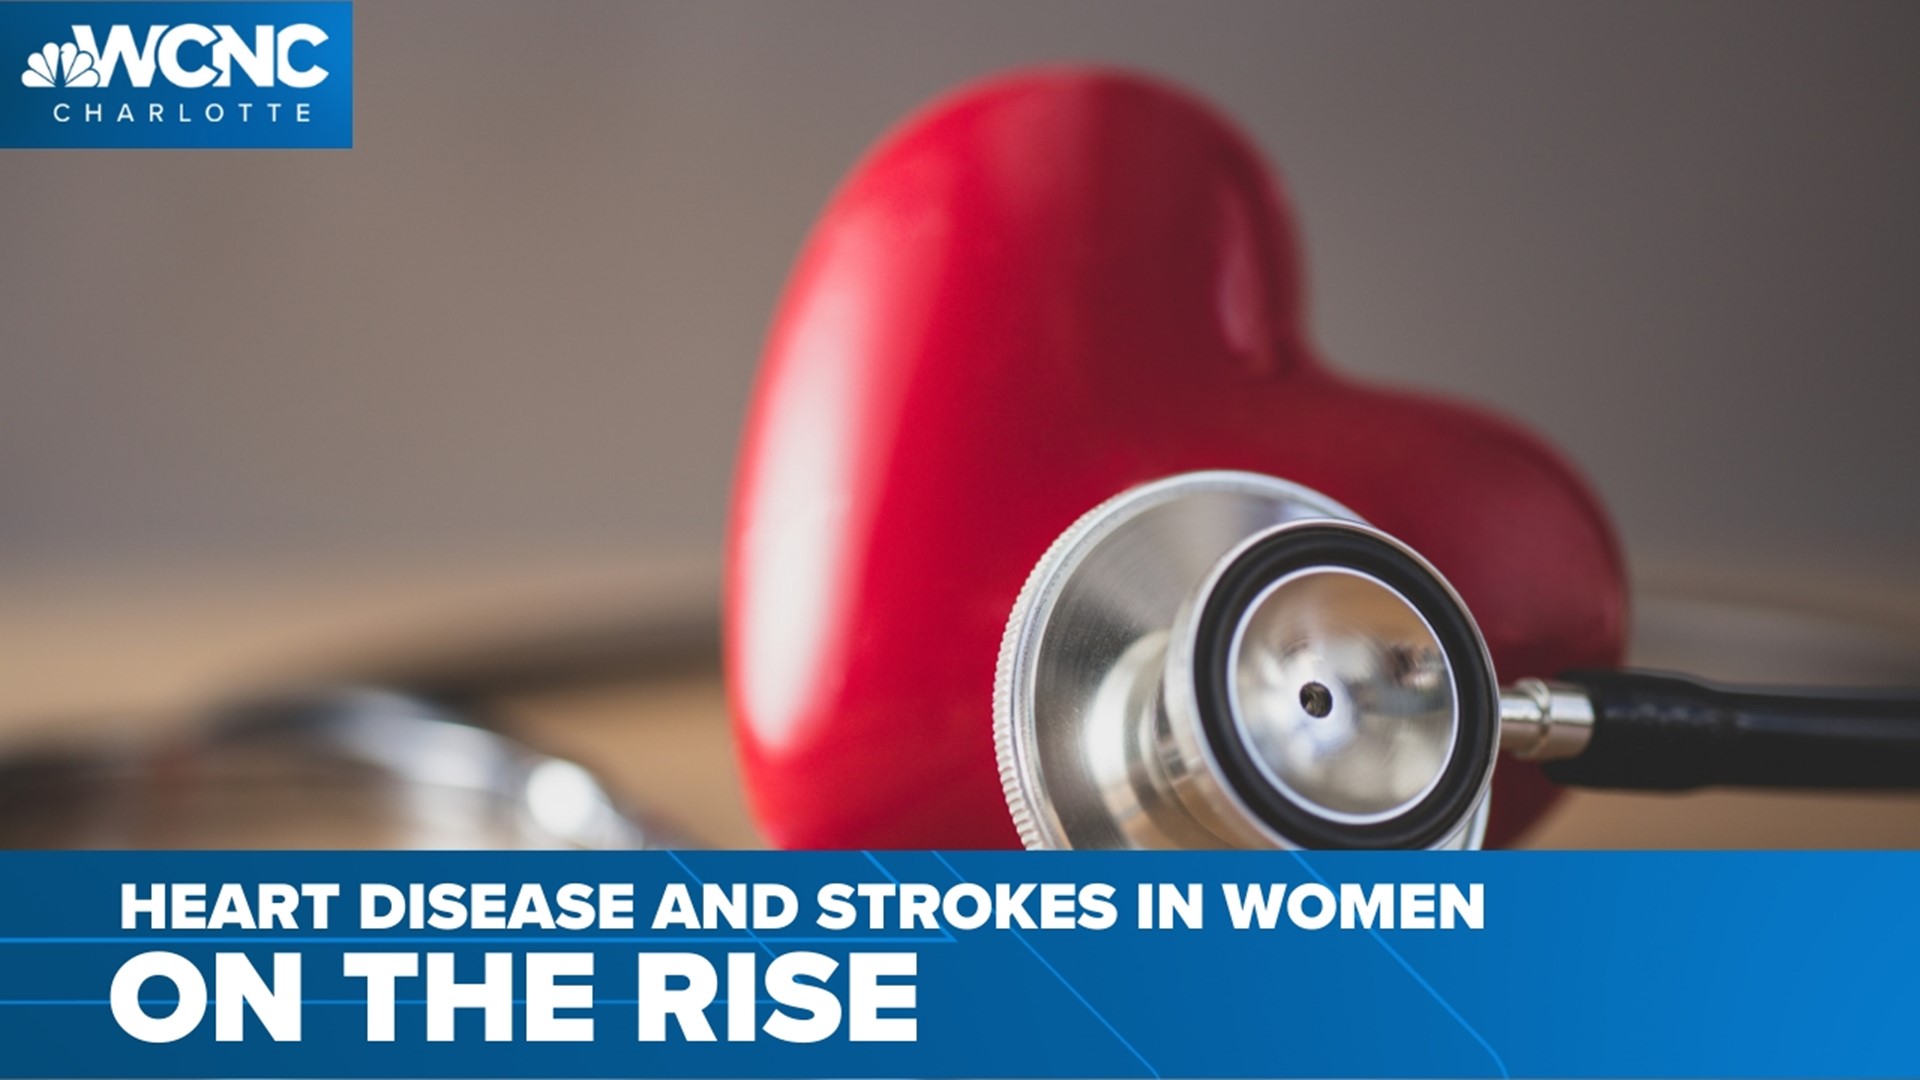 According to the CDC, heart disease is the leading cause of death in women in the United States.